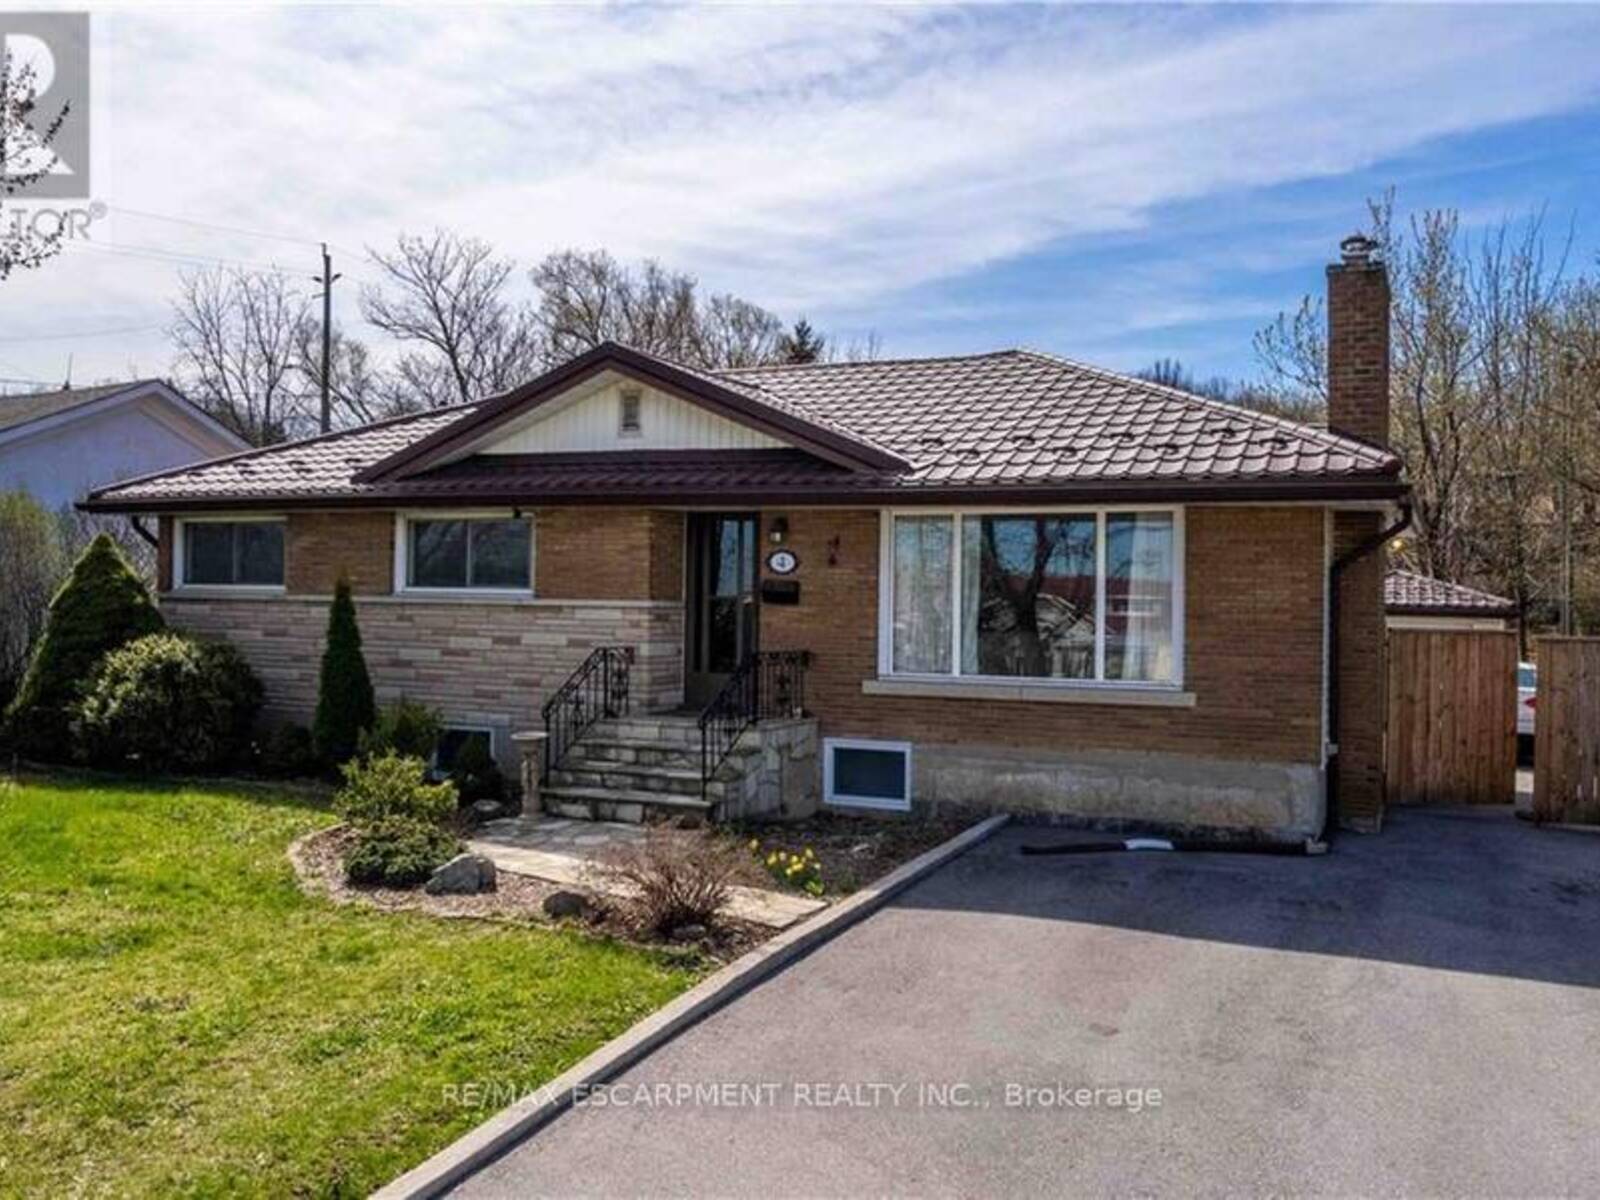 4 WARKDALE DR, St. Catharines, Ontario L2T 2V7